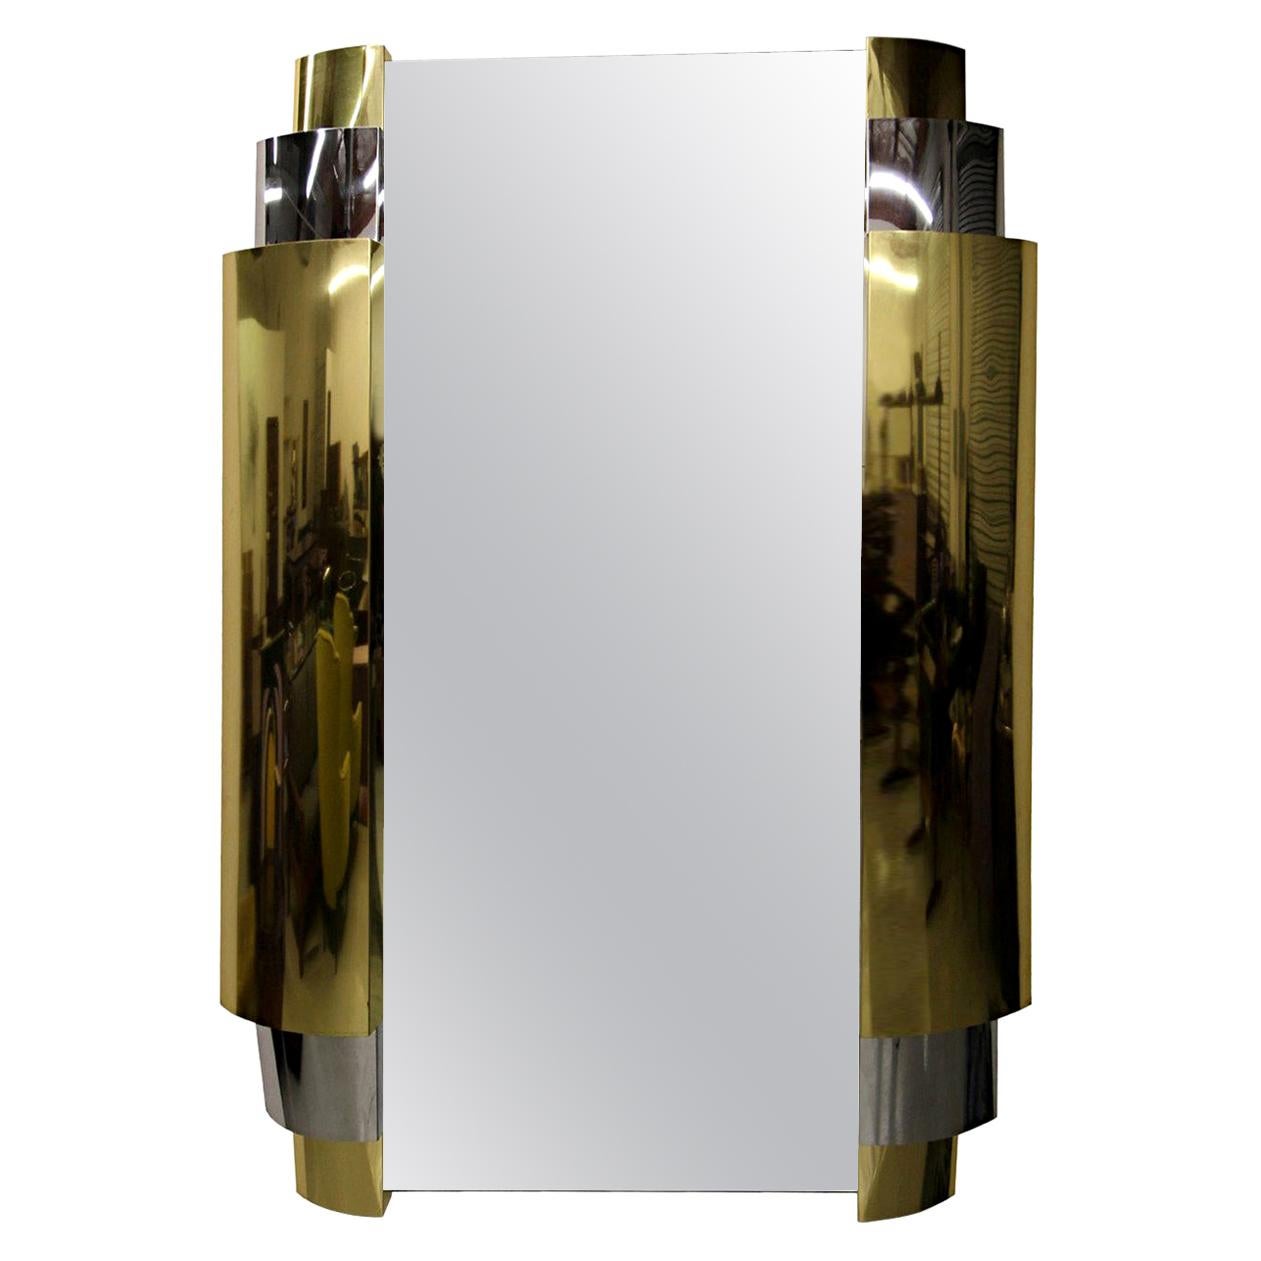 Large Art Deco Style Tiered Chrome and Brass Wall Mirror by Curtis Jere